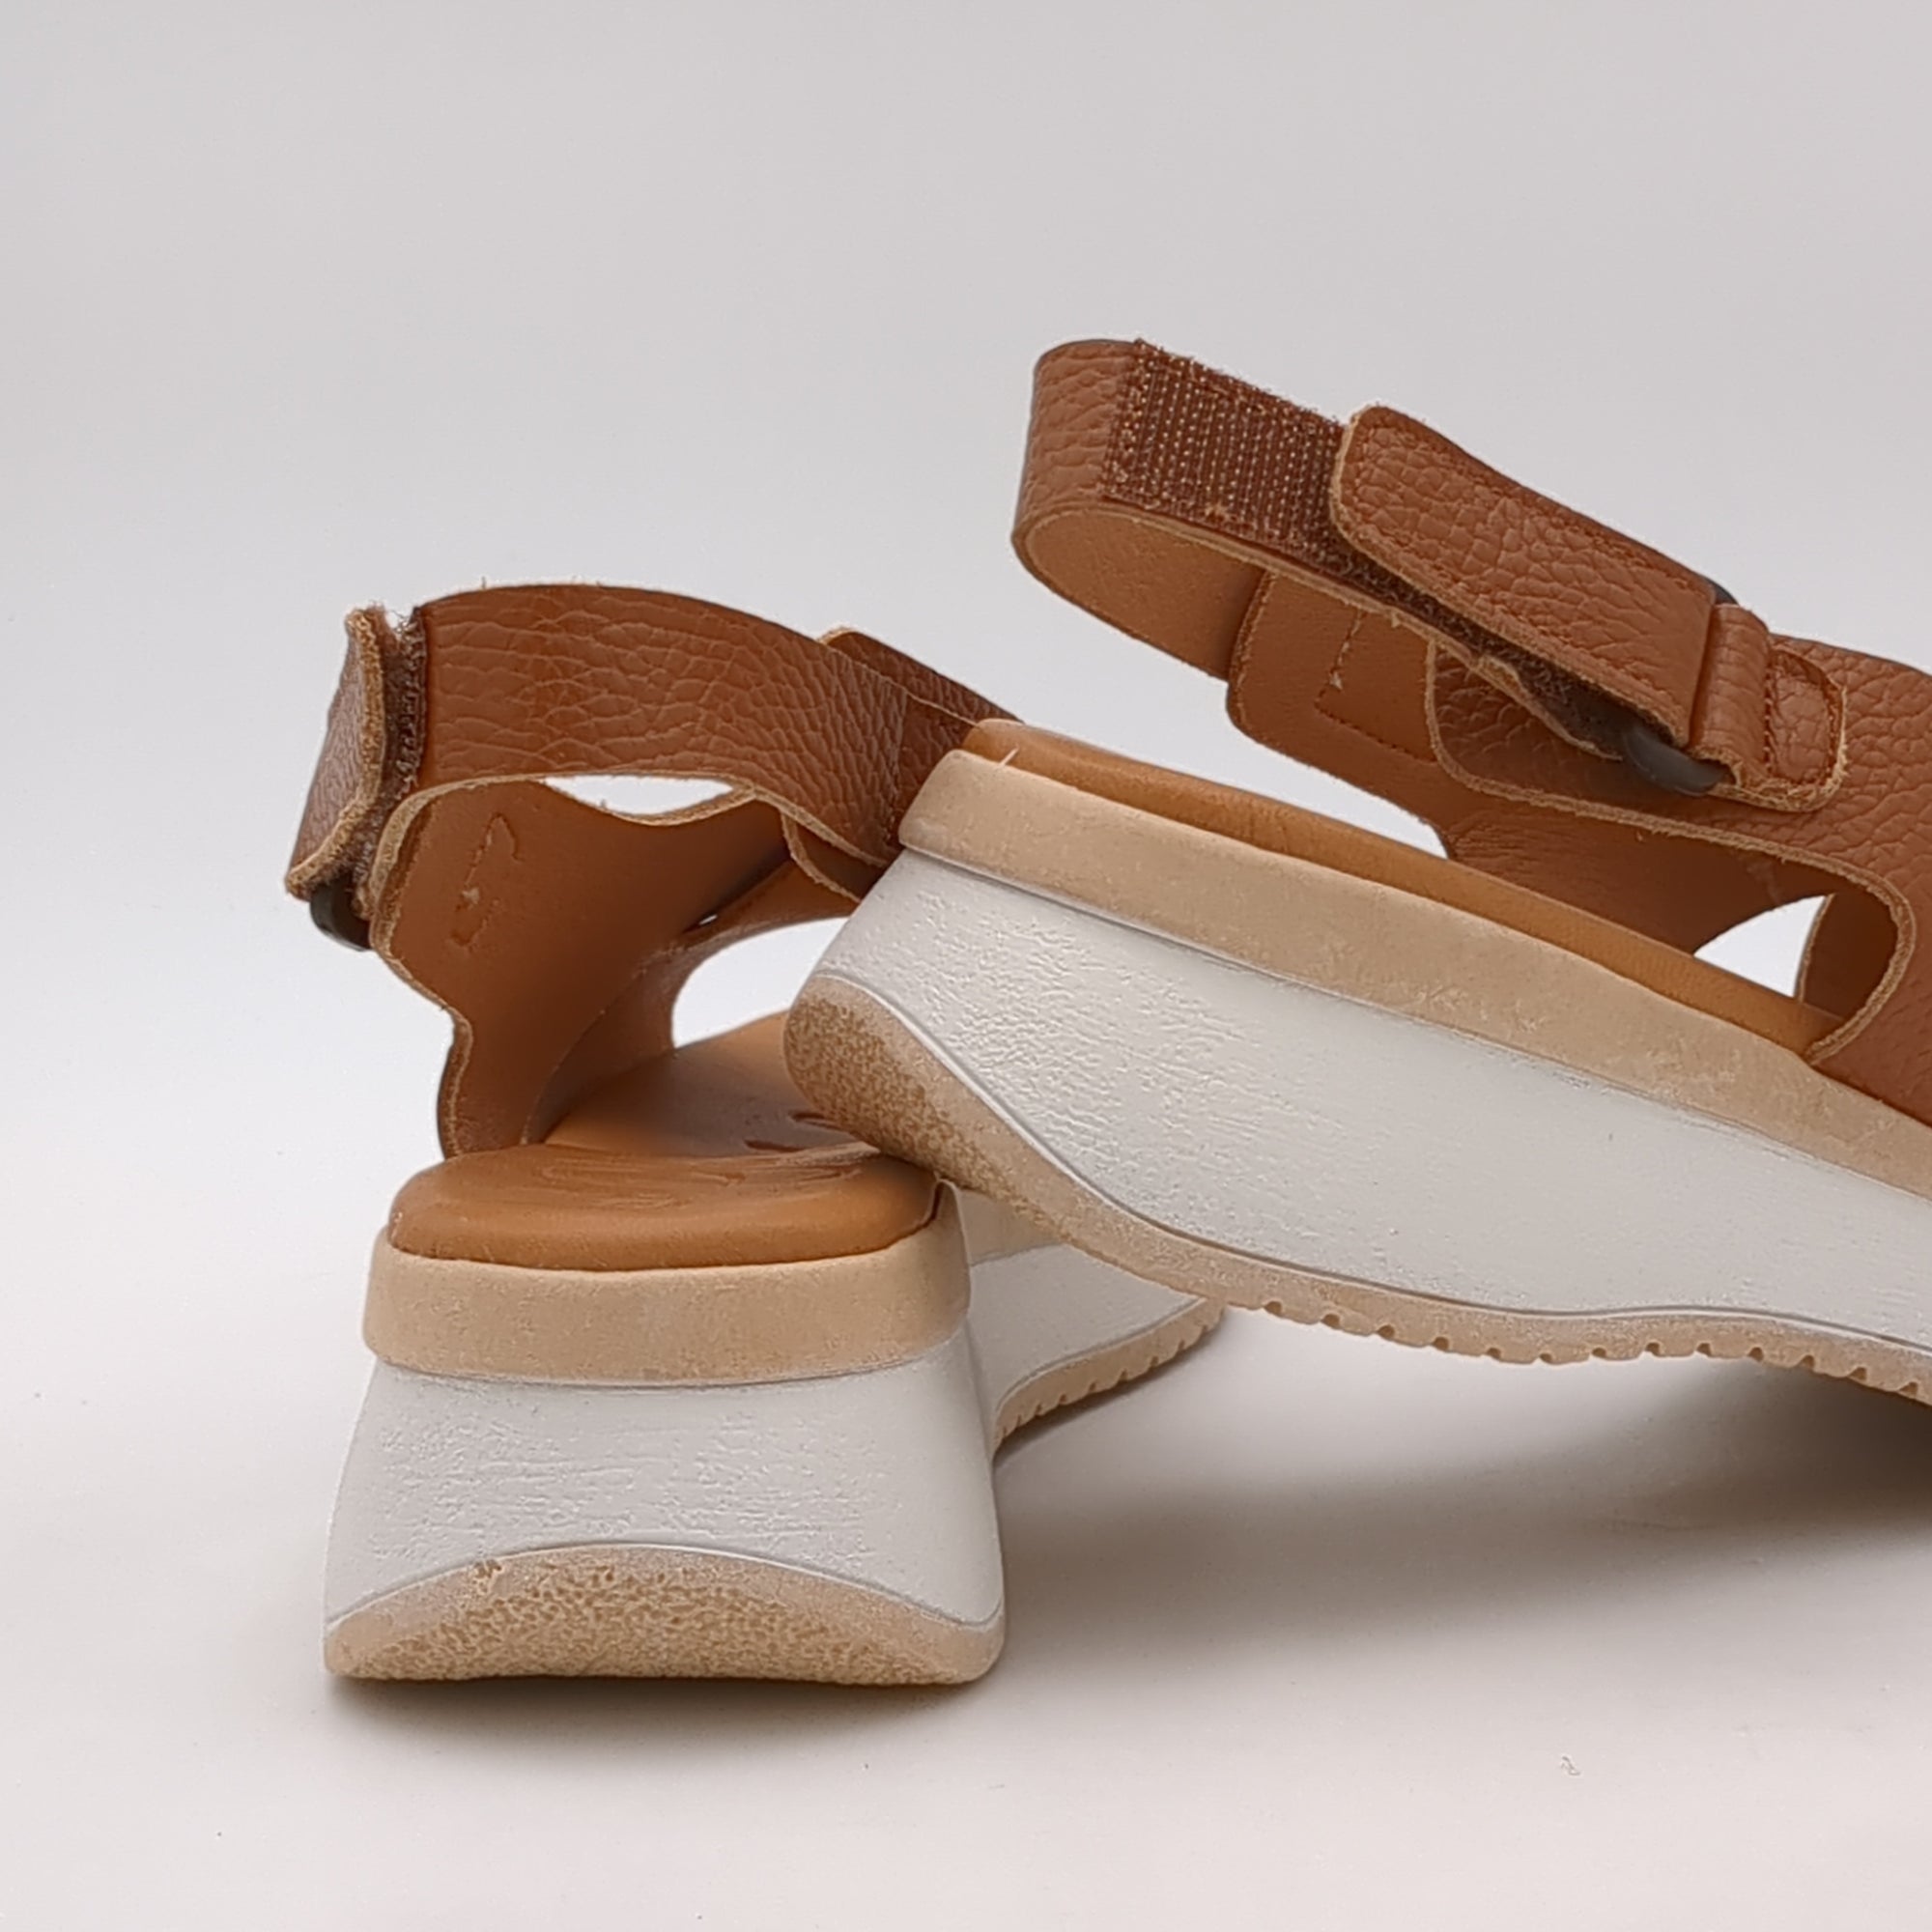 Lifestyle image of the sandals worn at a casual outdoor event, demonstrating their versatility and stylish design.